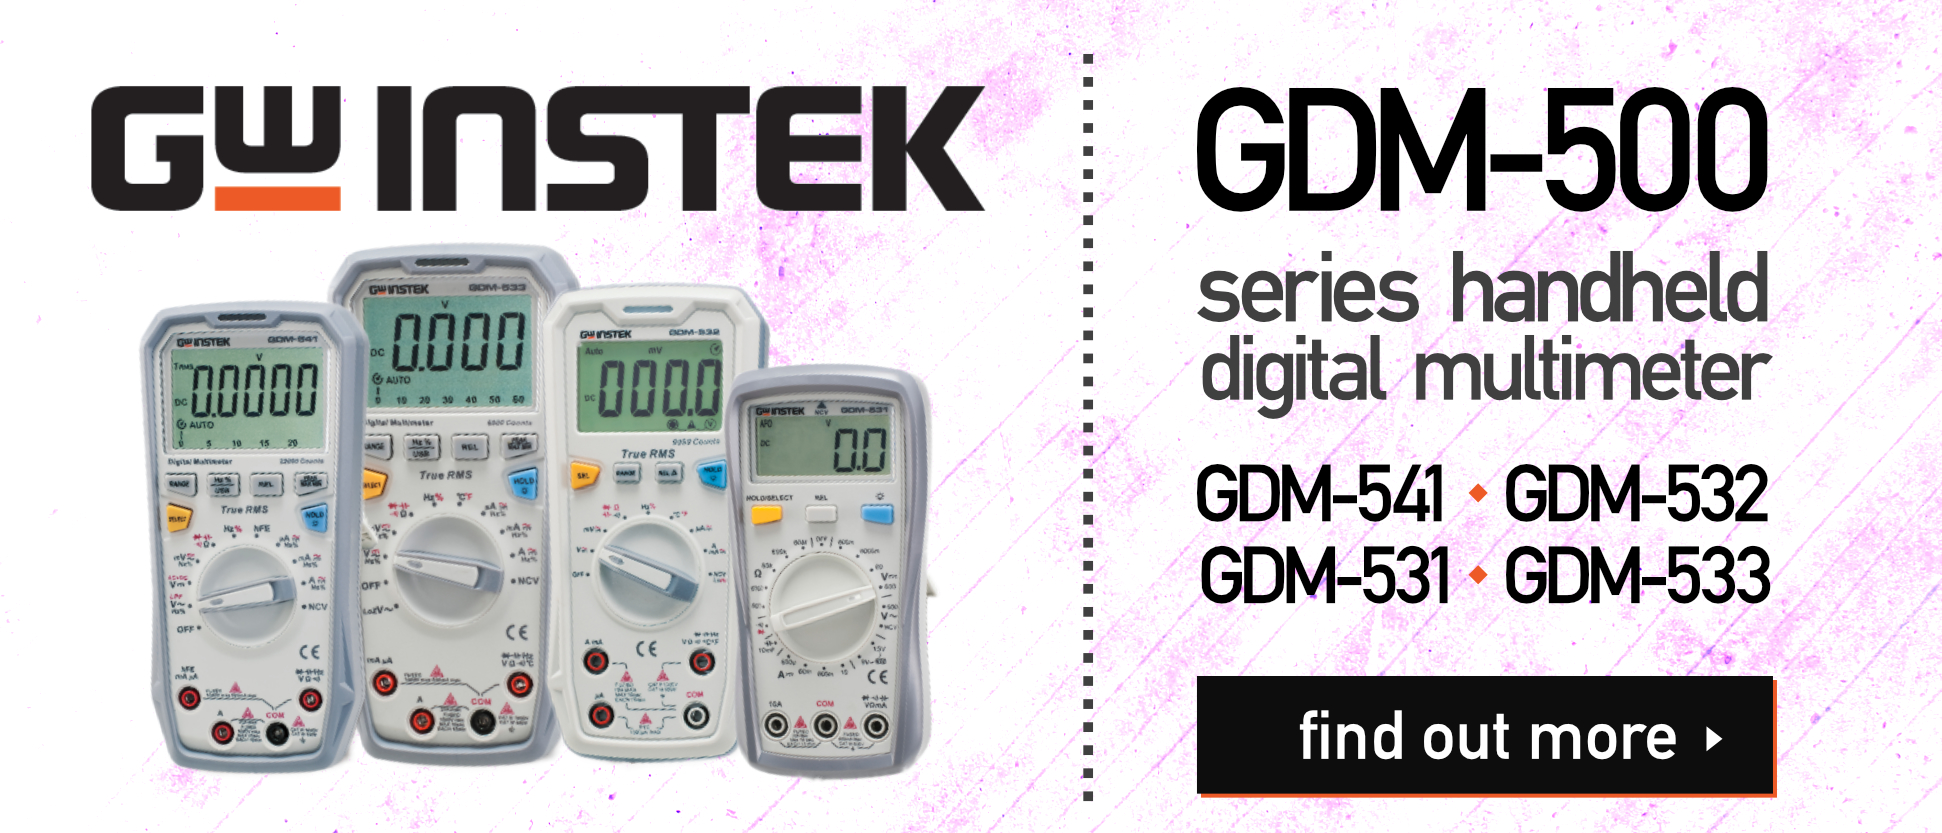 New generation handheld DMM, the GDM-500 series; In your palm, powerful and beyond